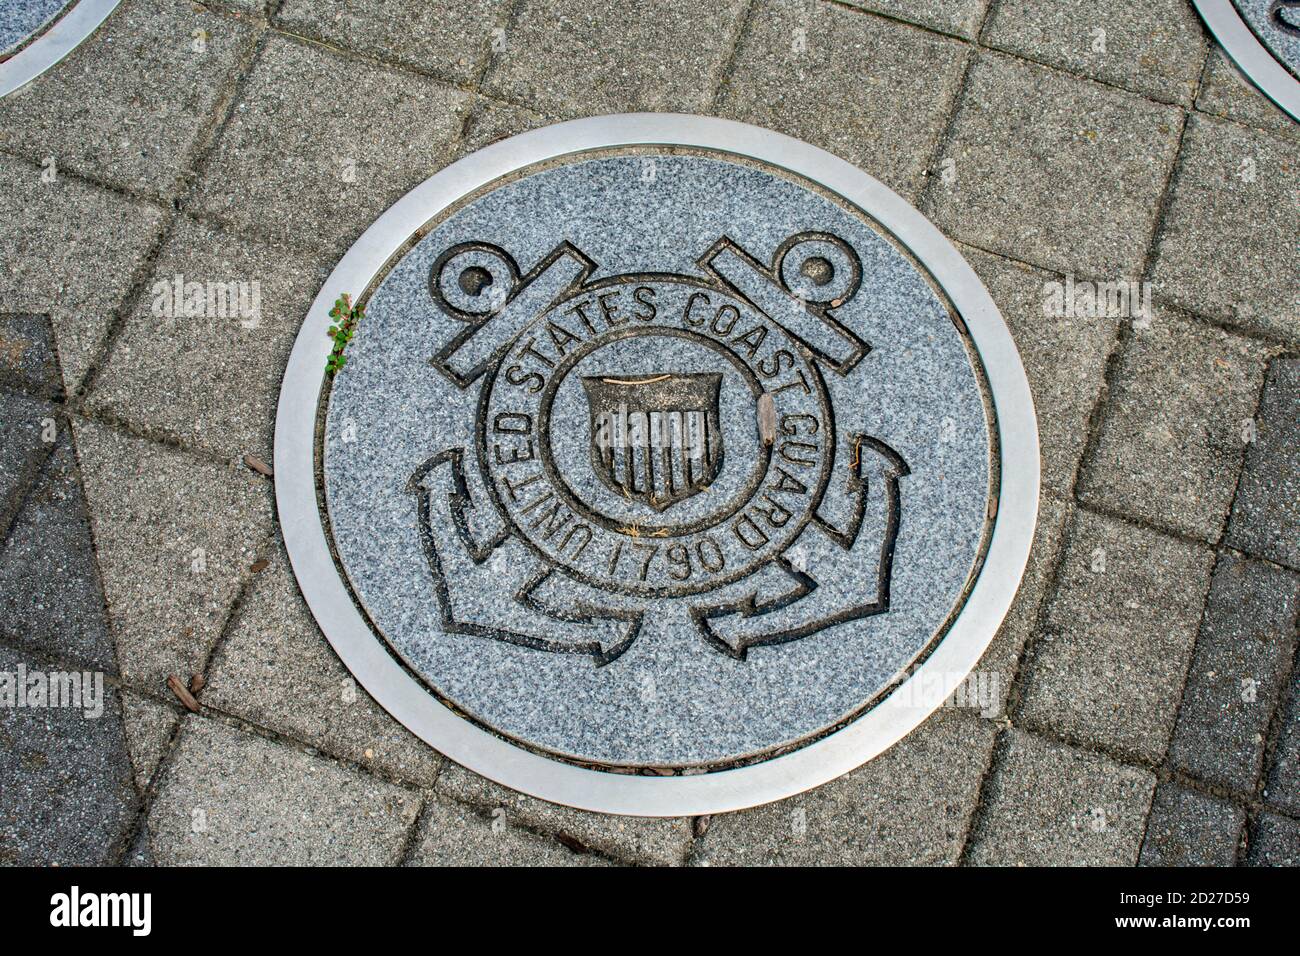 WILDWOOD, NEW JERSEY - September 16, 2020: A Circular Symbol Representing The US Coast Guard on the Ground. Stock Photo